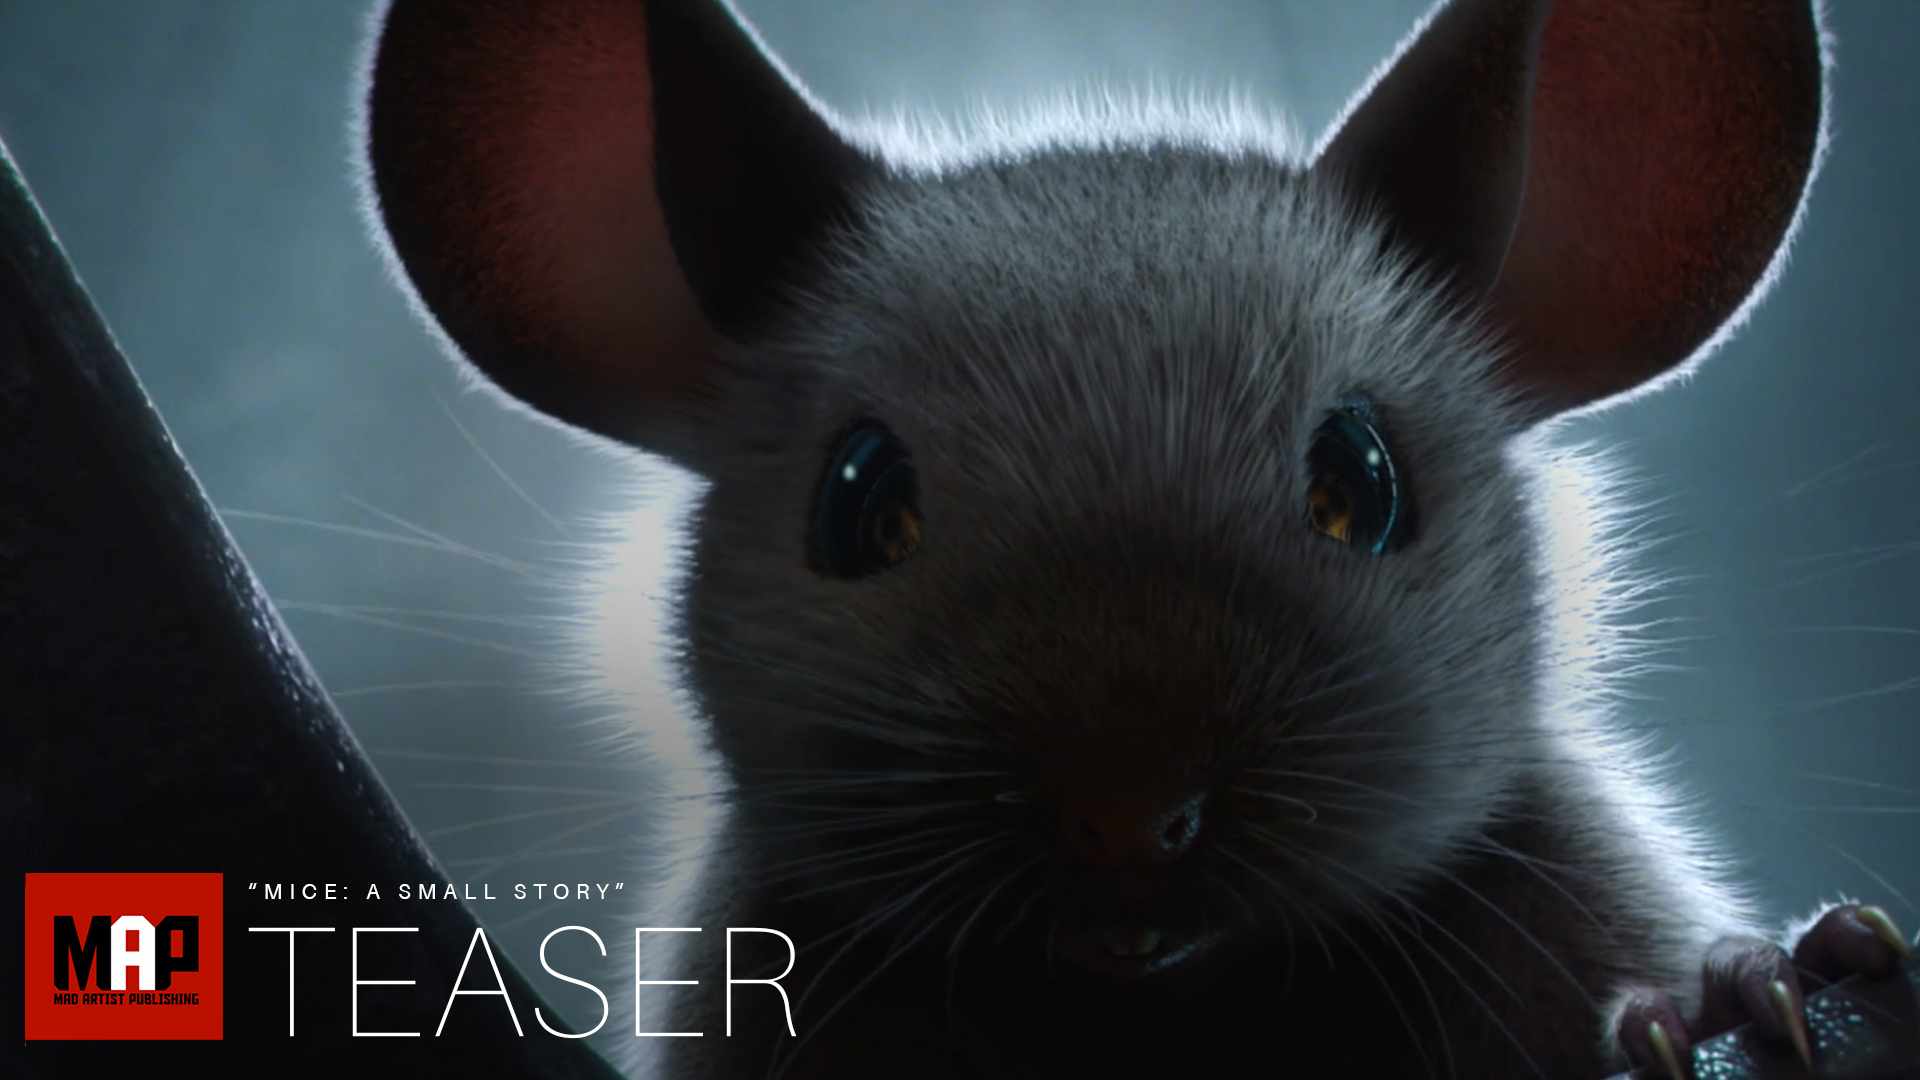 TRAILER | CGI 3d Animated Adventure Film ** MICE: A Small Story ** Animation by Objectif 3D